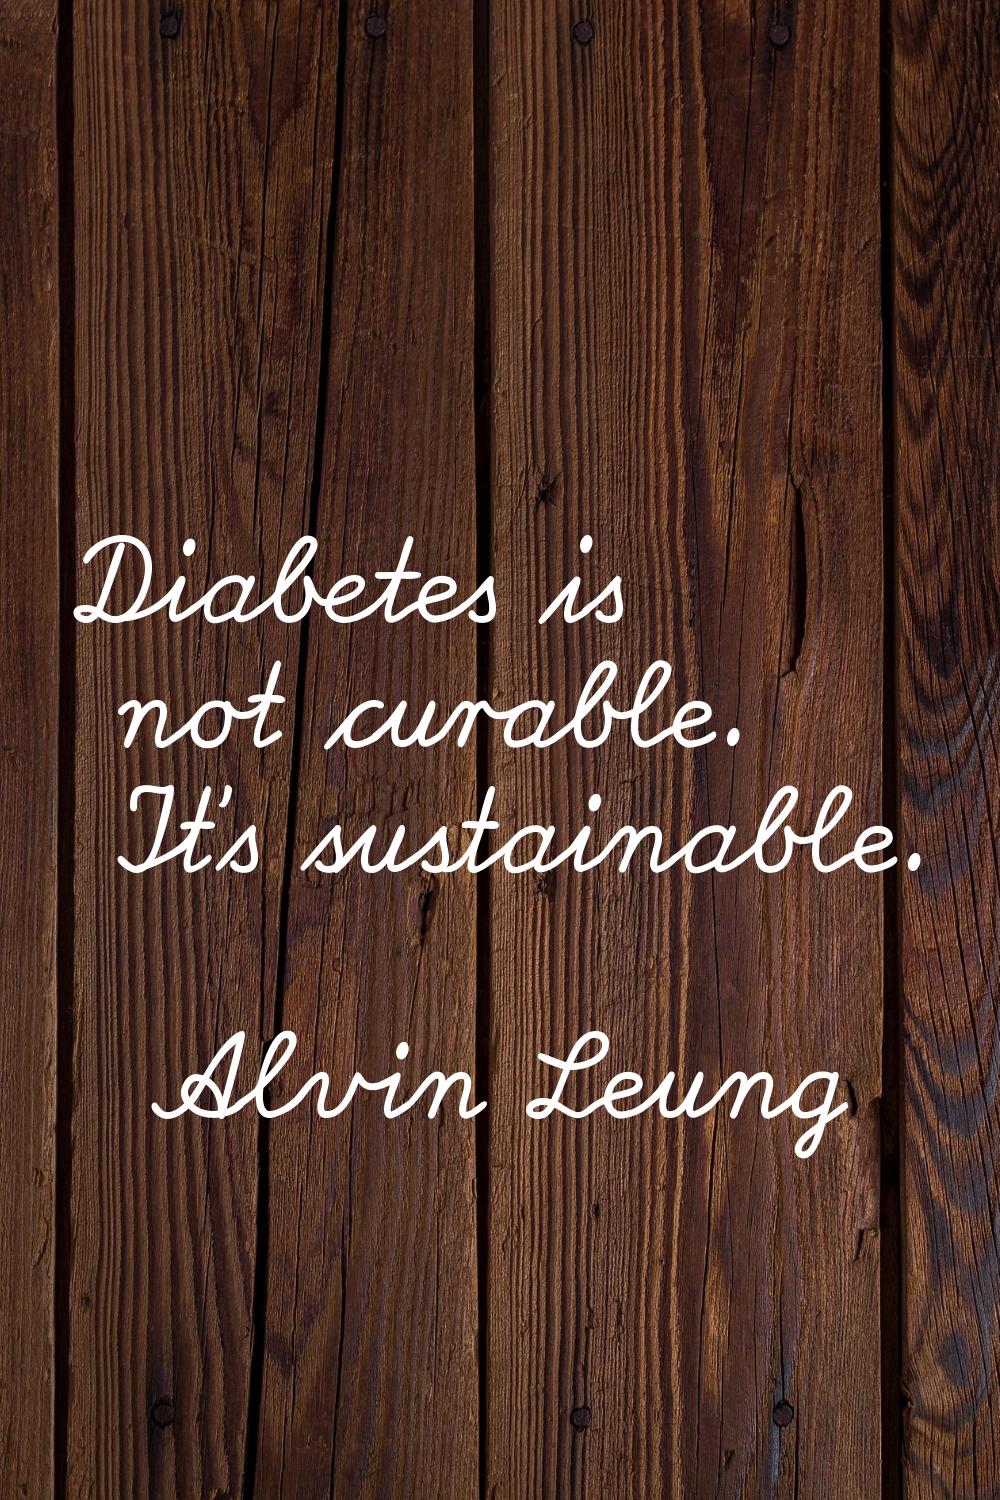 Diabetes is not curable. It's sustainable.